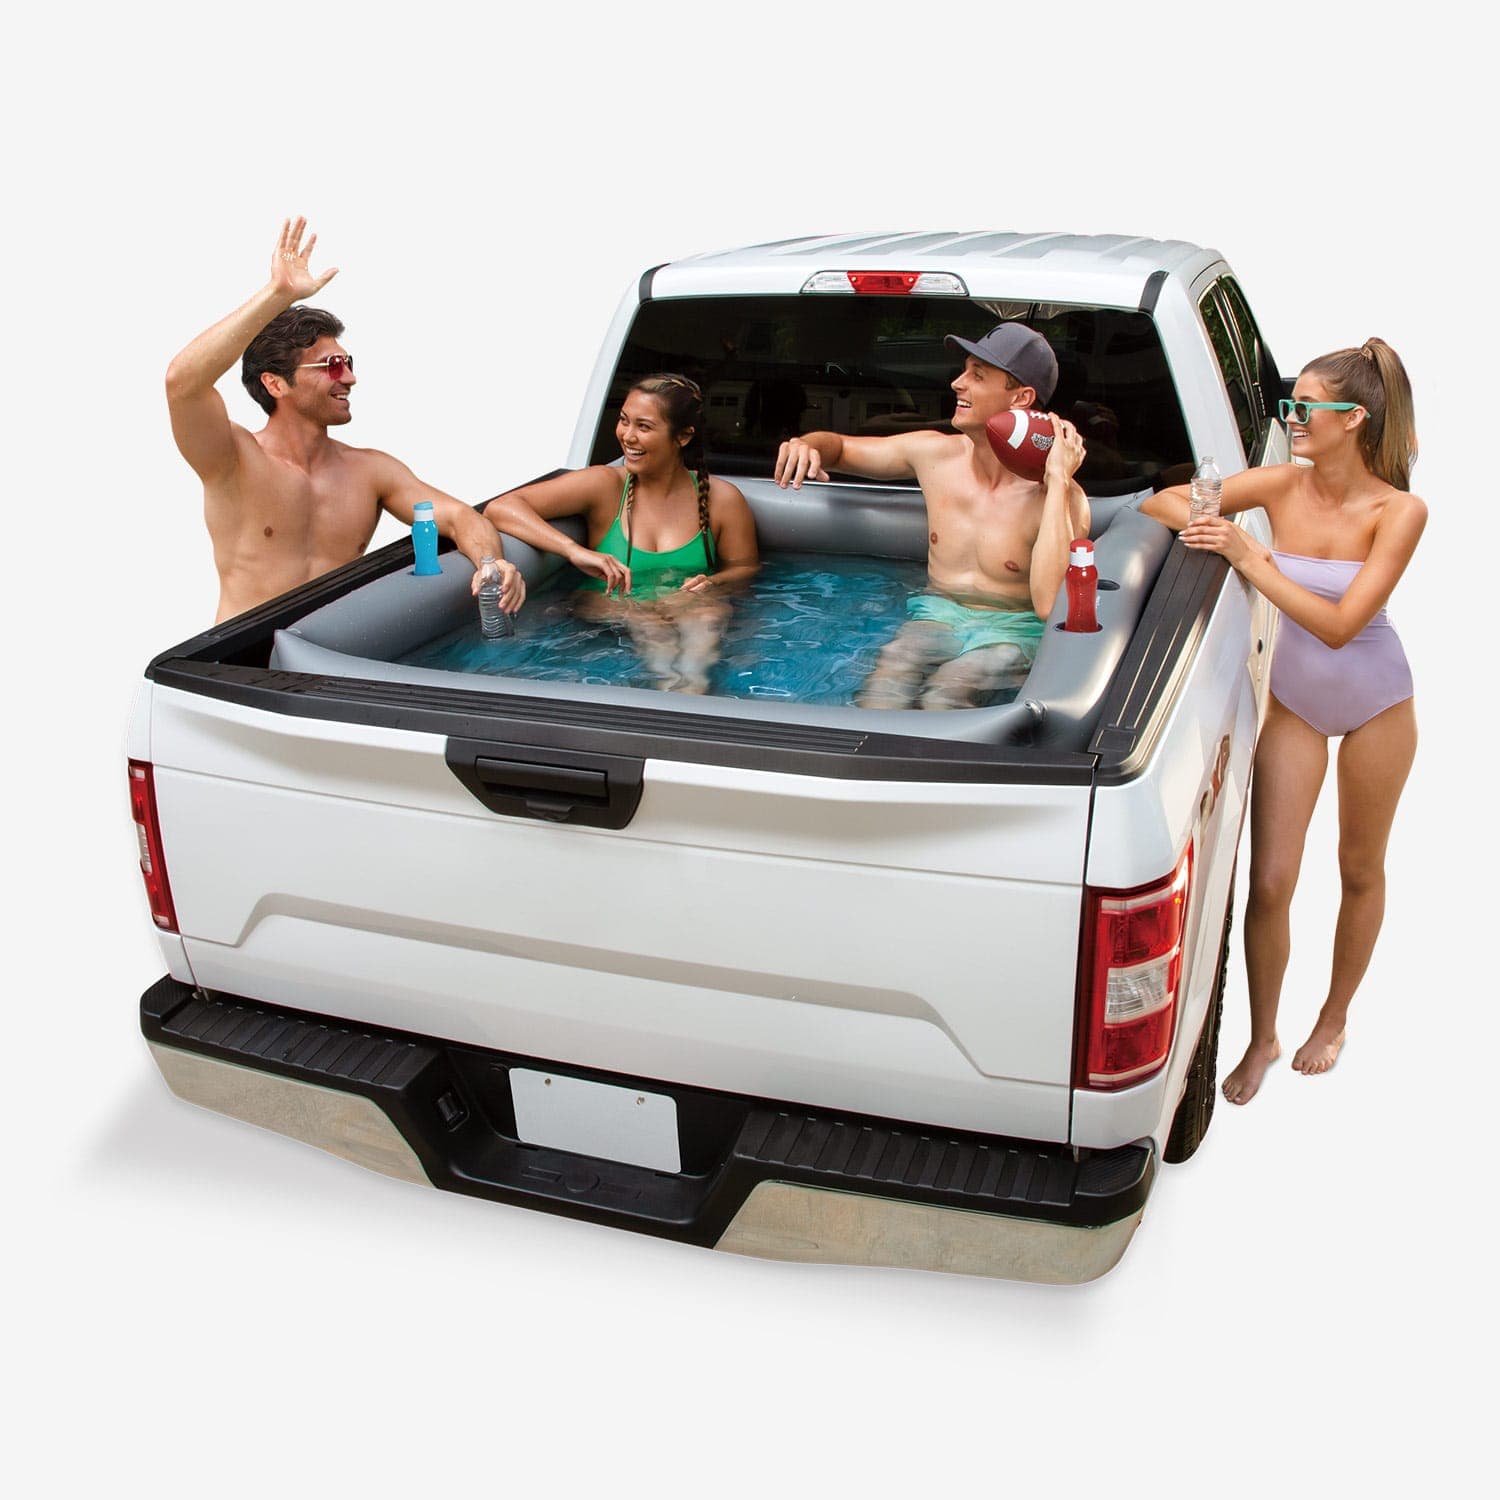 Portable Swimming Pool Turns Your Pickup Truck into the Ultimate Chill Zone  - Pick-Up Pools